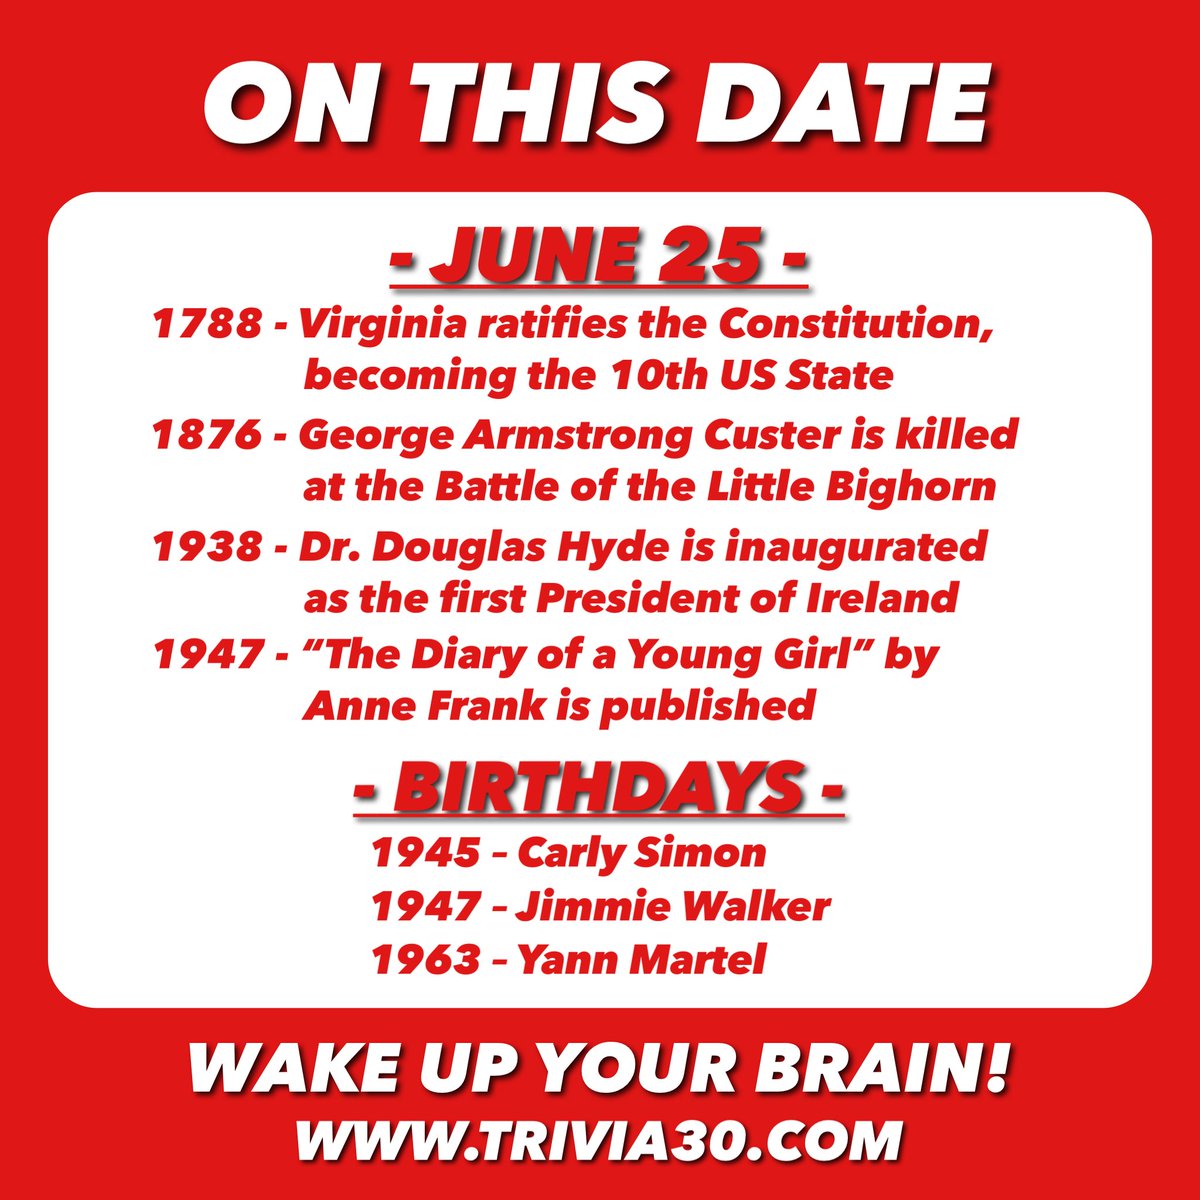 Your OTD trivia for 6/25. Join us tonight at 6:30 on Facebook Live for TRIVIA:30 Online, and have a great Sunday! #trivia30 #wakeupyourbrain  #Virginia #USConstitution #GeneralCuster #LittleBighorn #Ireland #AnneFrank #CarlySimon #JimmieWalker #YannMartel #LifeOfPi